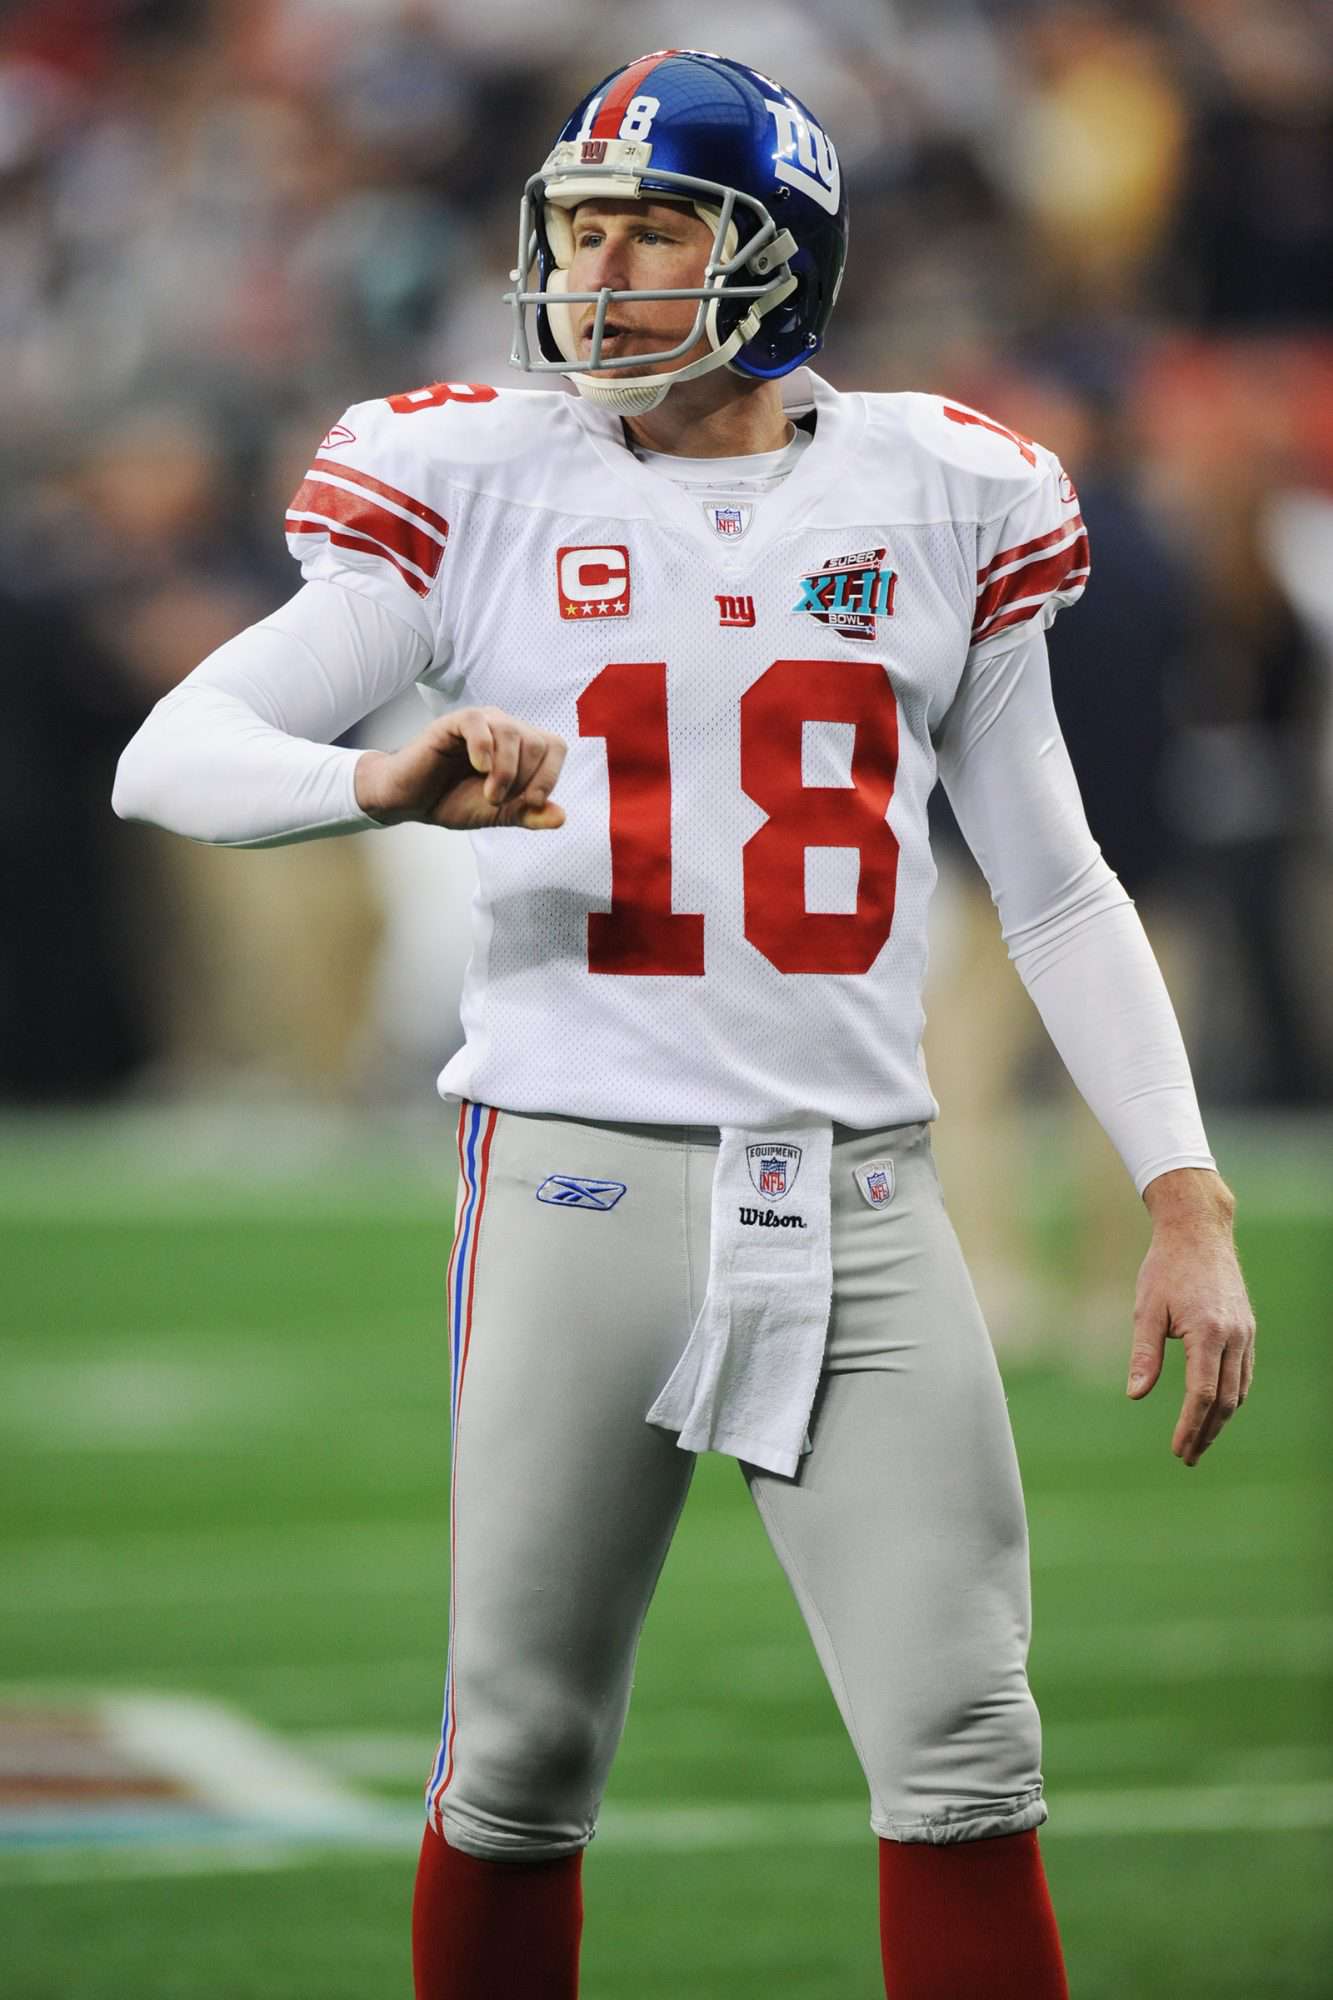 Jeff Feagles #18 of the New York Giants participates in warm-ups before Super Bowl XLII